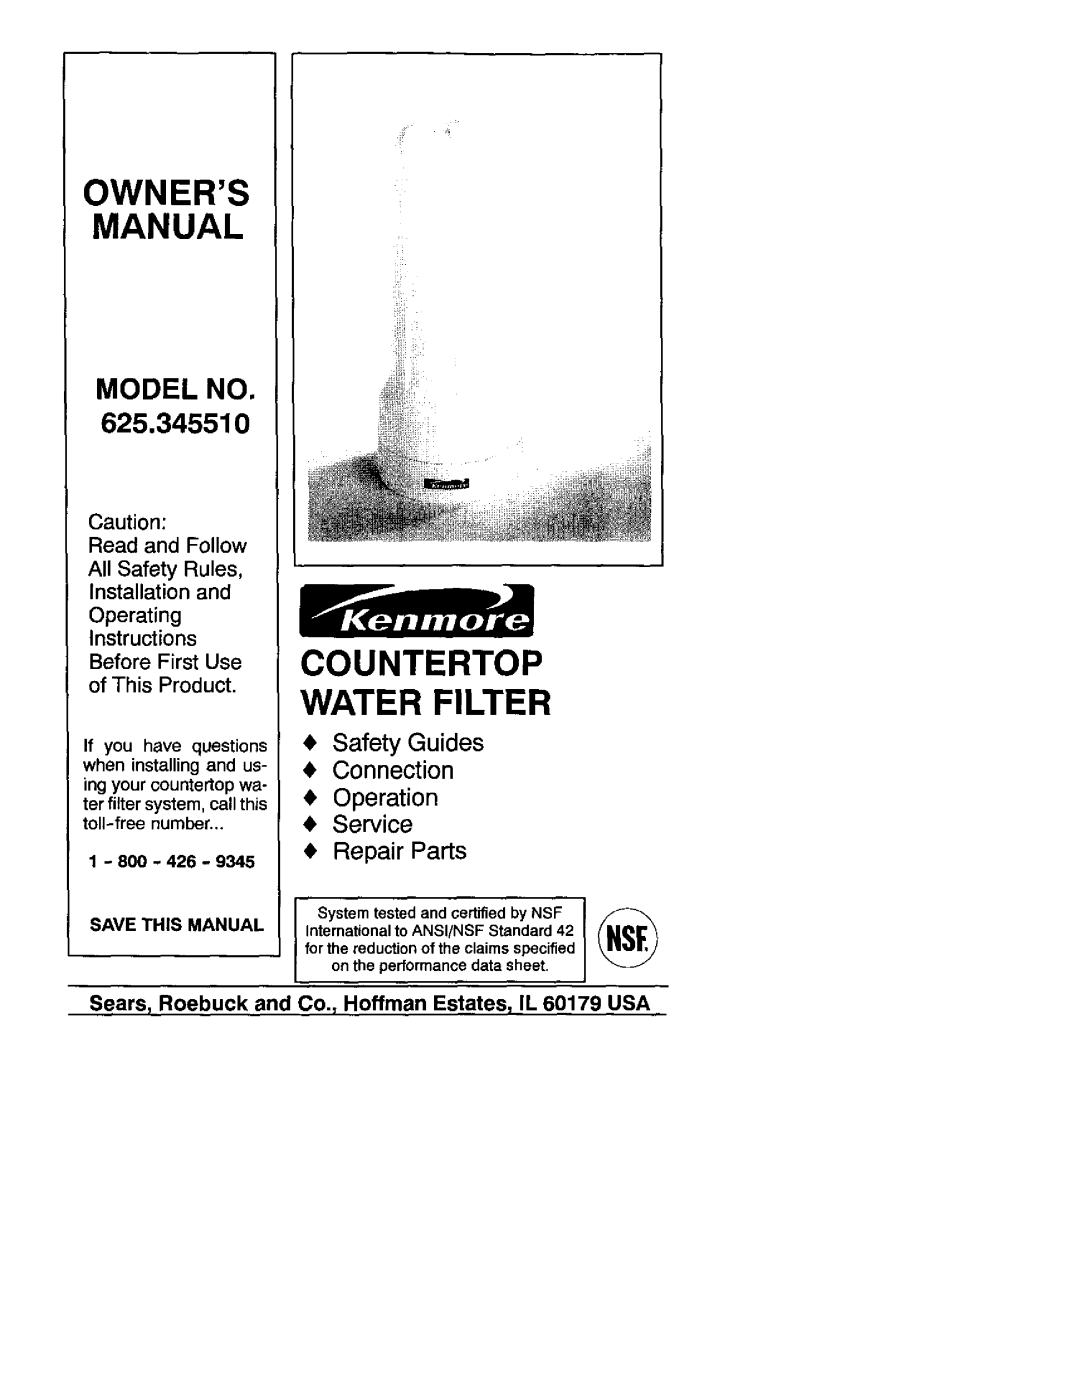 Kenmore 625.34551 owner manual Water Filter, Model No, If you have questions, 1 - 800 - 426 - SAVE THIS MANUAL, Countertop 